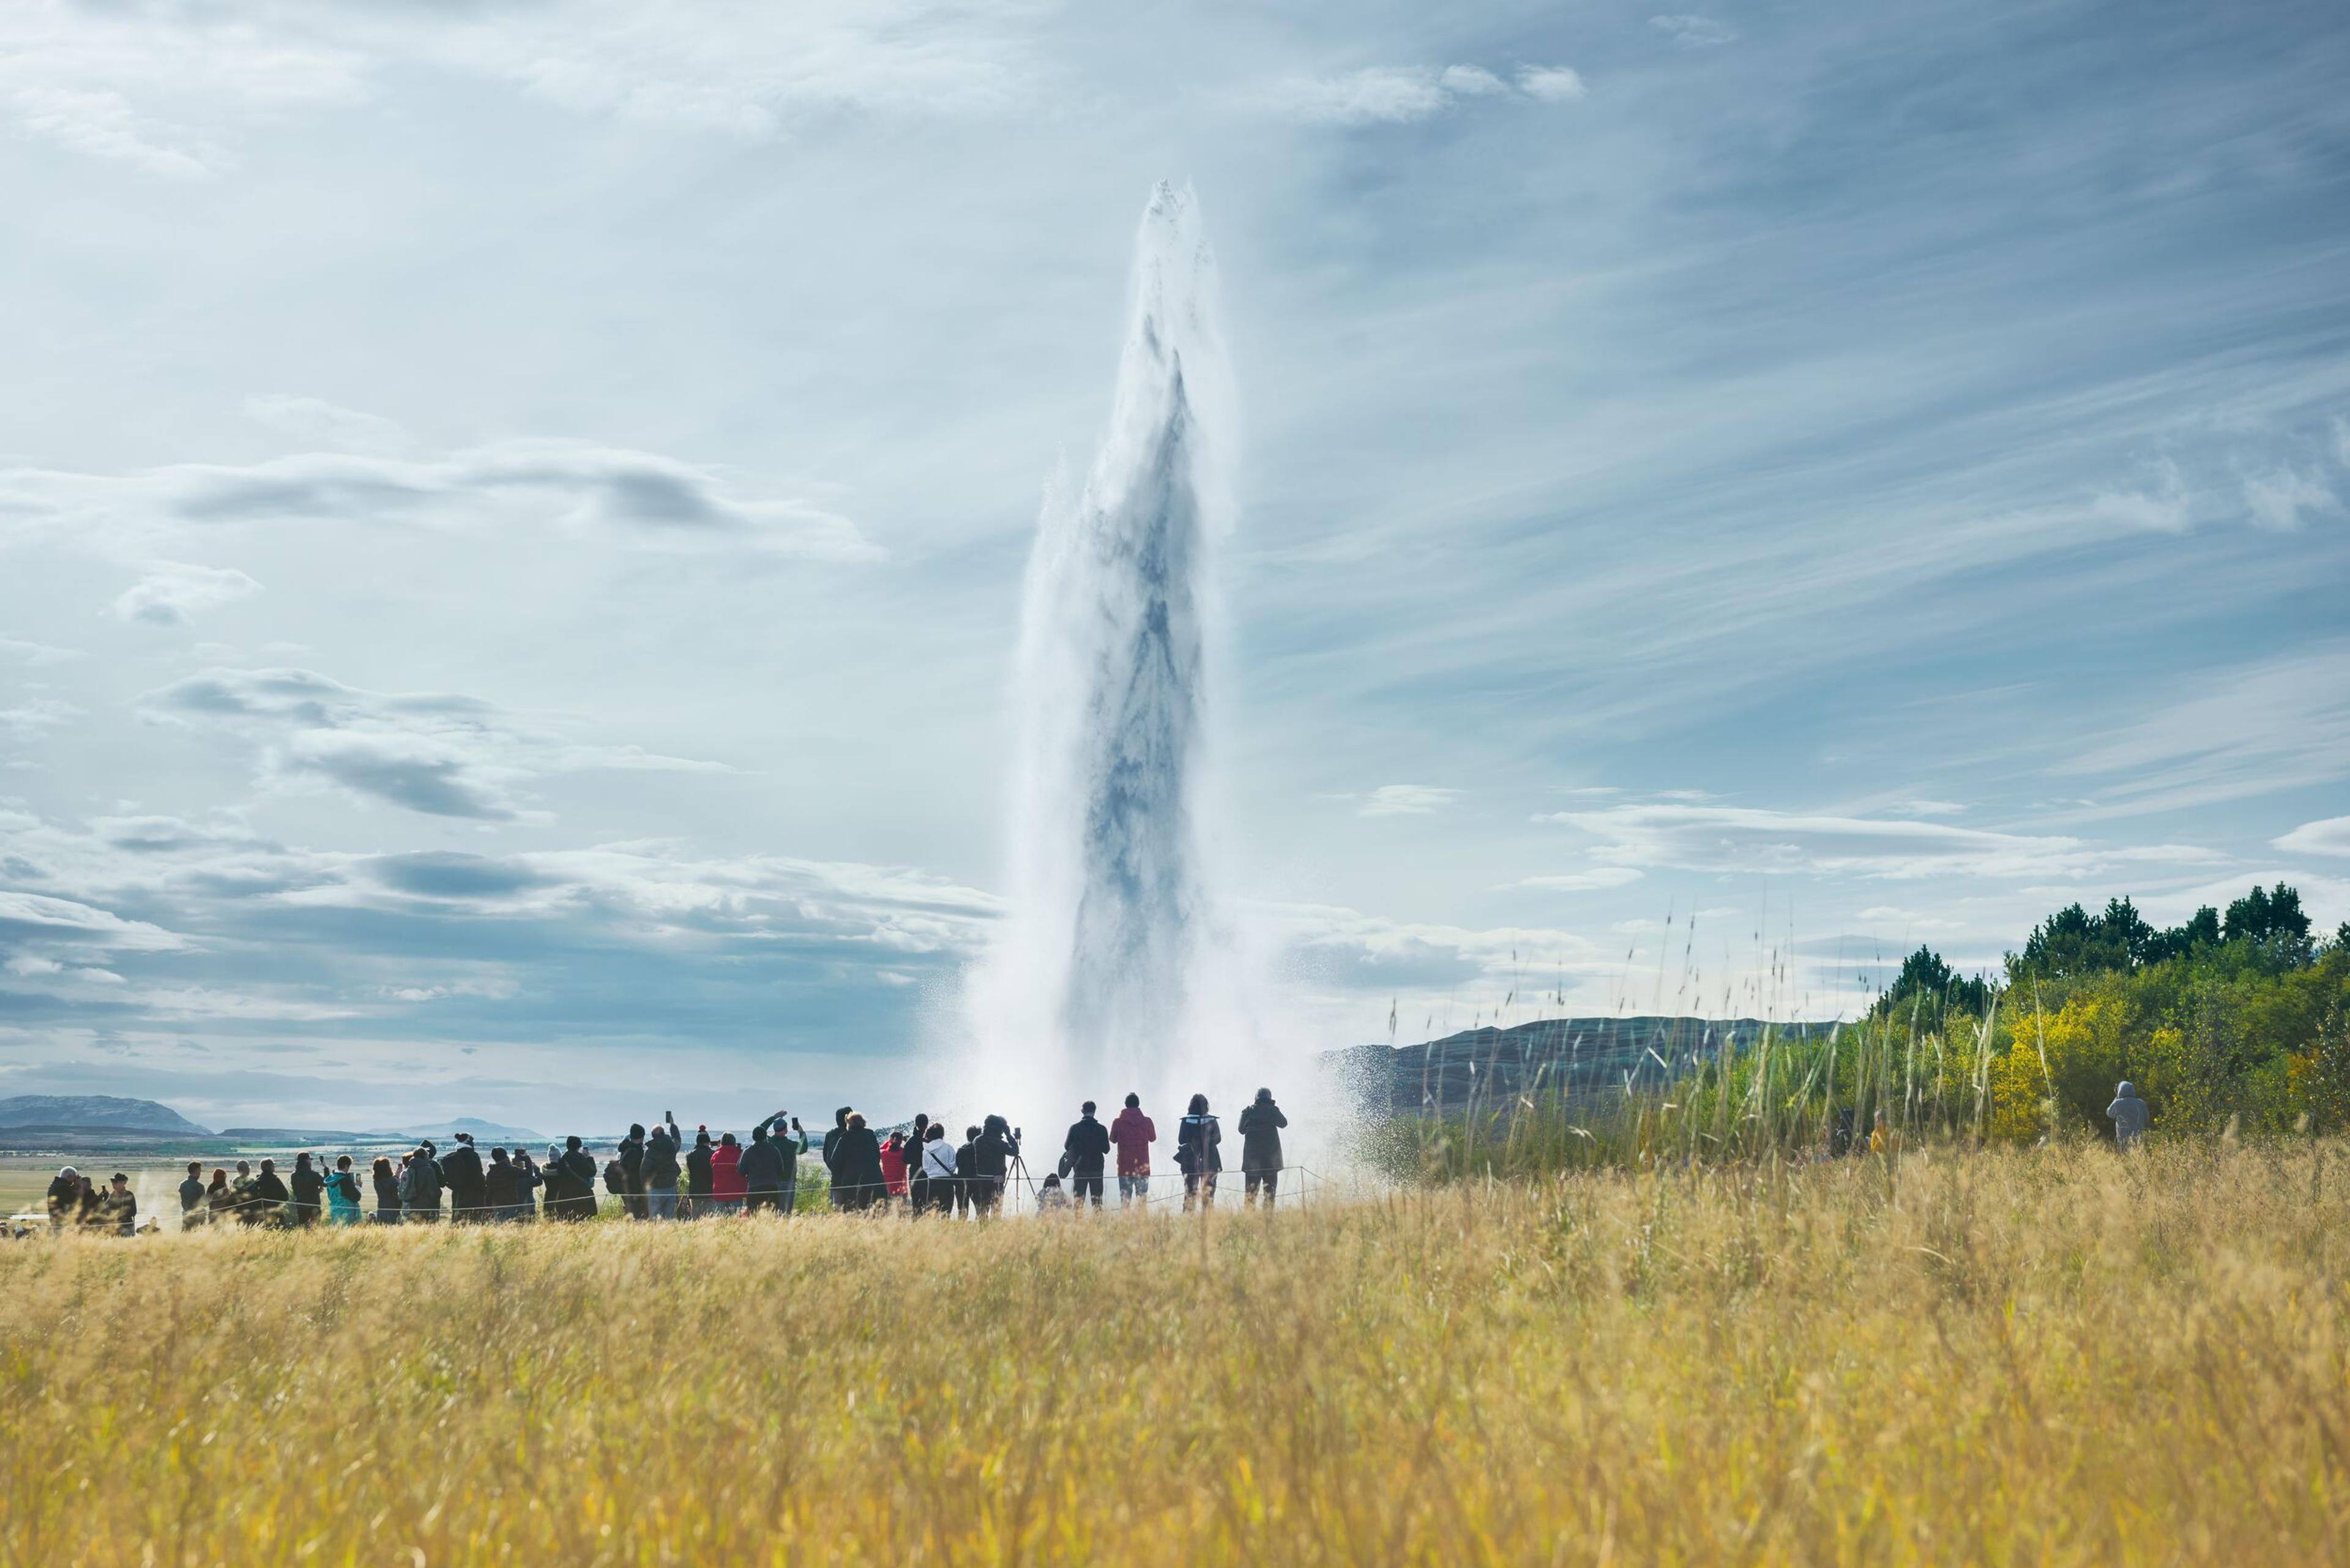 Group of people gathered around a erupting geysir in Iceland.